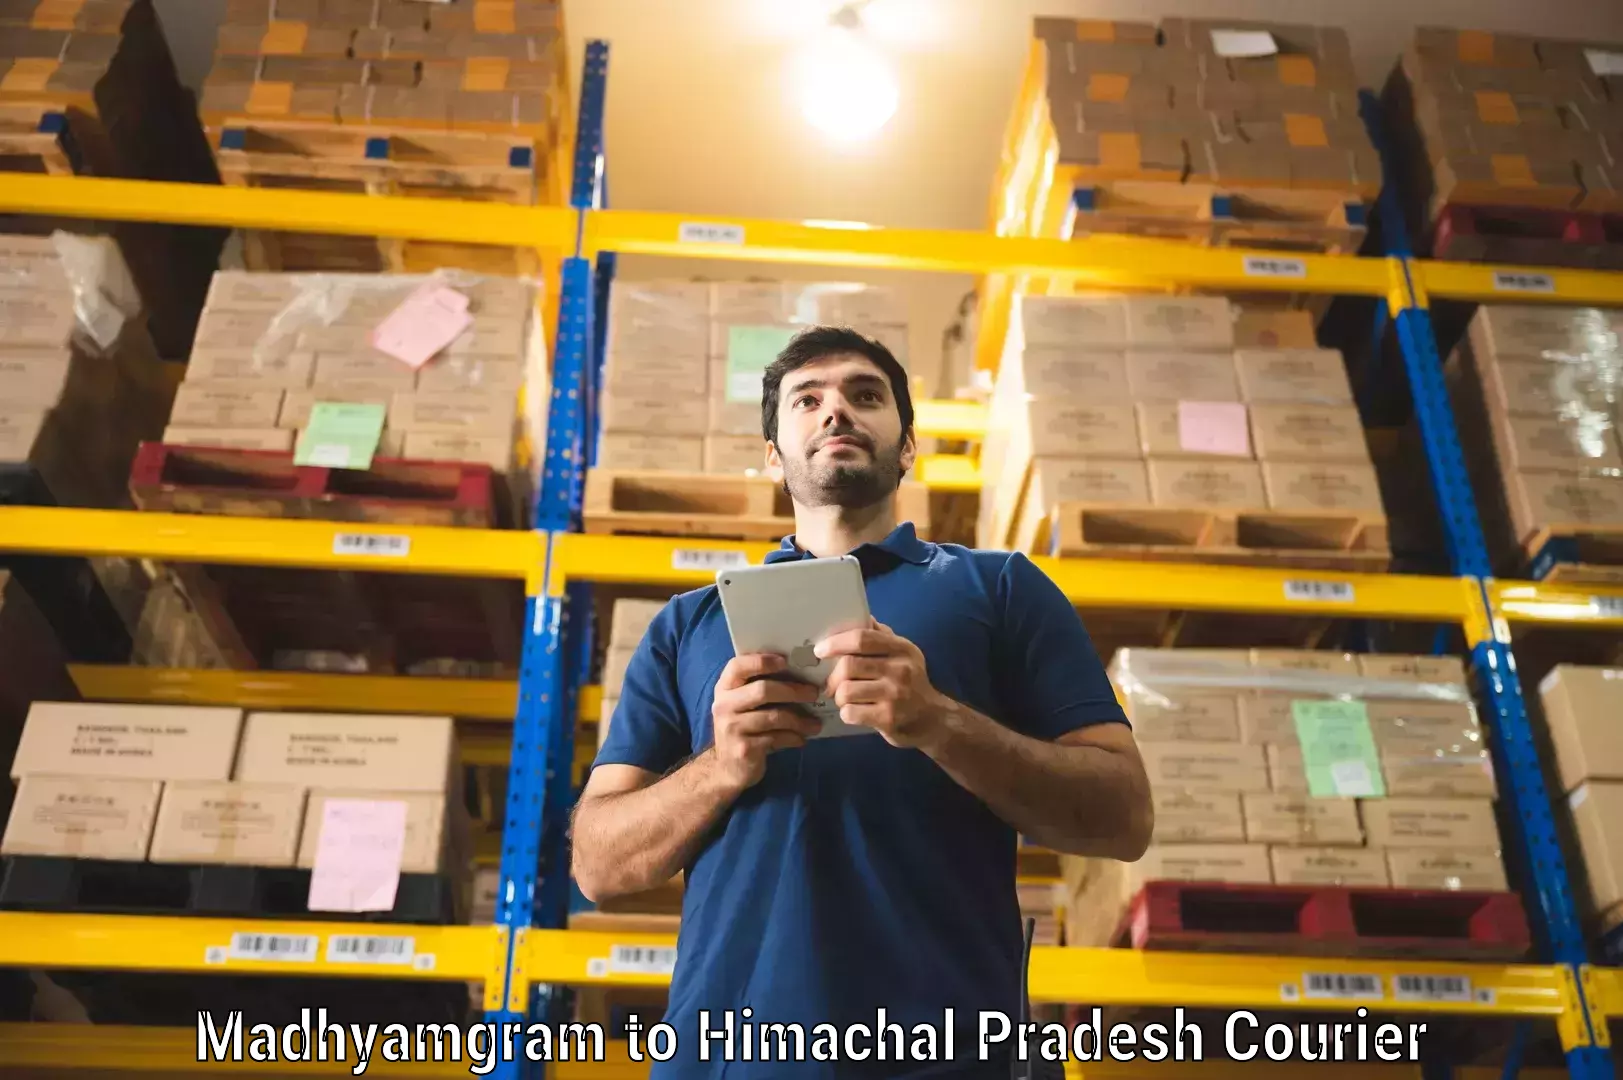 Express delivery capabilities Madhyamgram to Himachal Pradesh